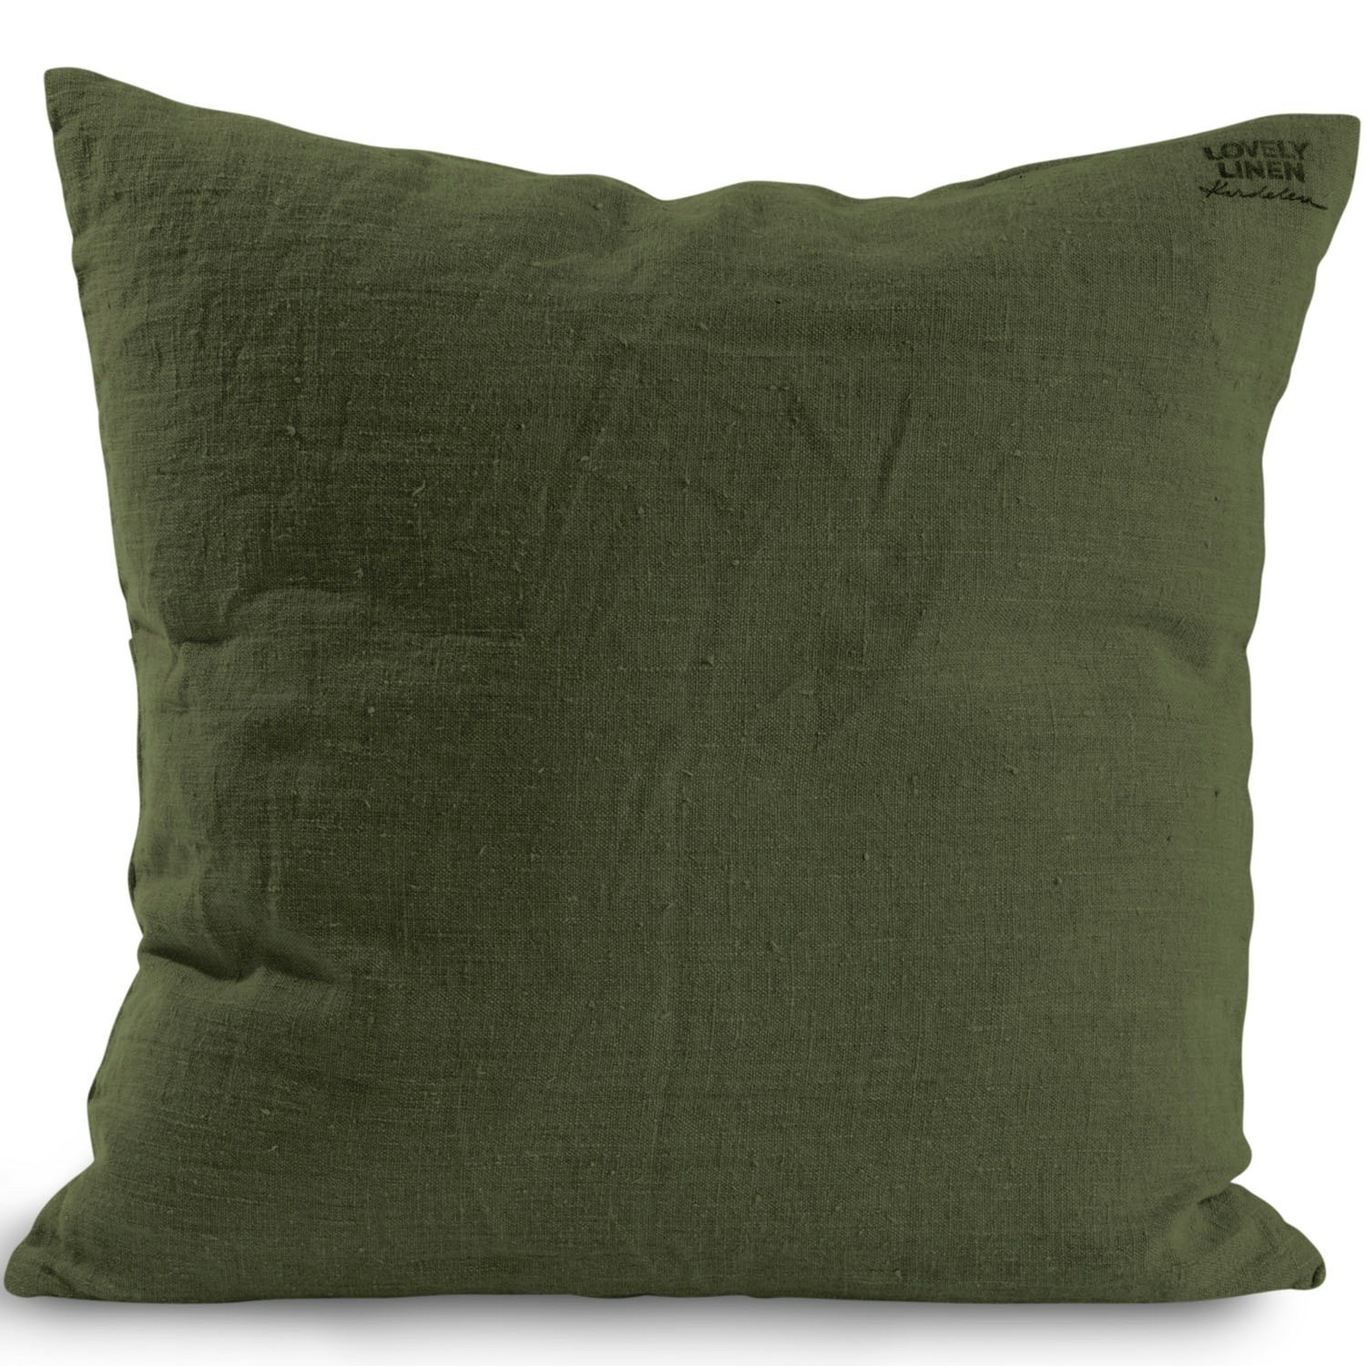 Lovely Cushion Cover 50x50 cm, Jeep Green